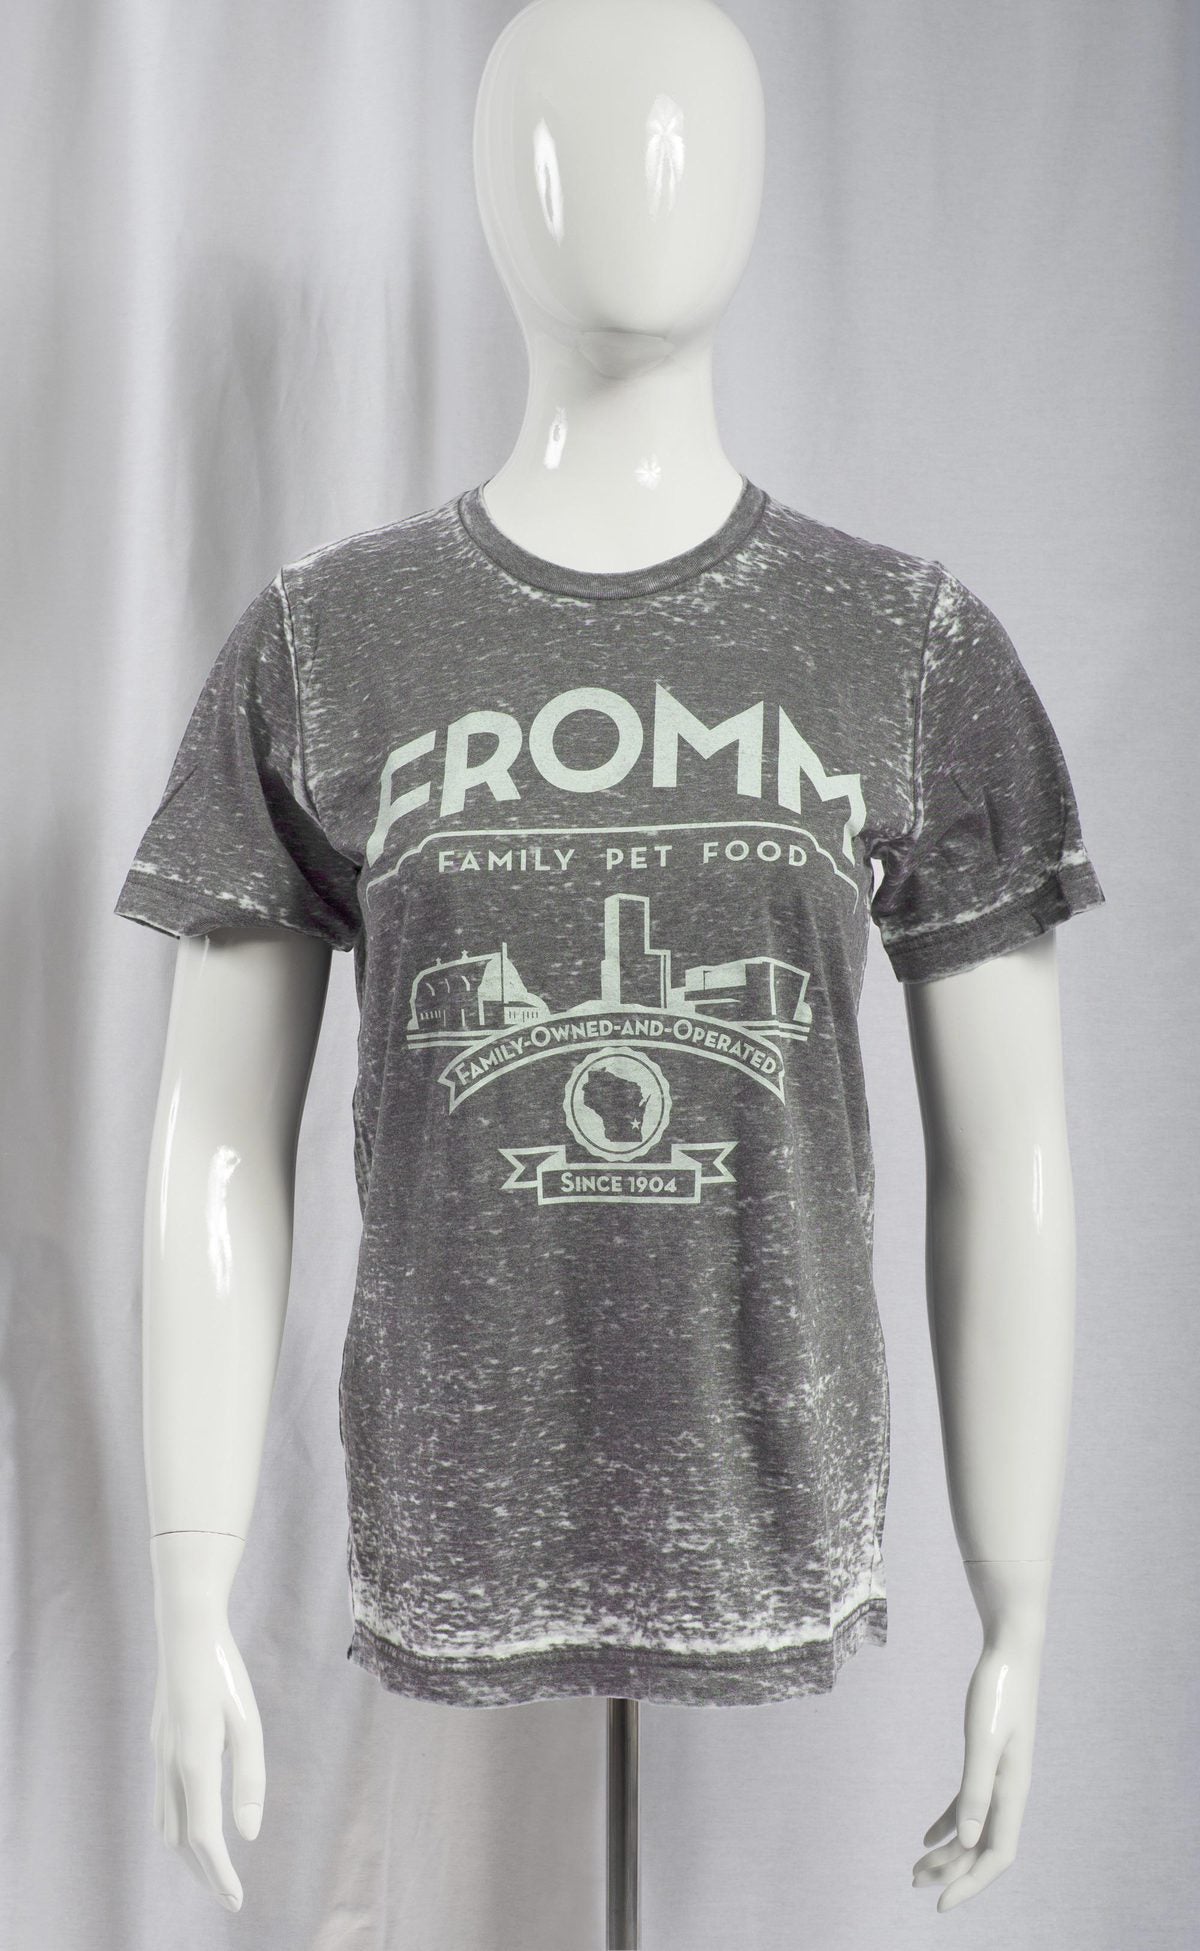 Art Deco 'Fromm Family Pet Food' with Plant Short Sleeve Tee (Acid Wash Grey)